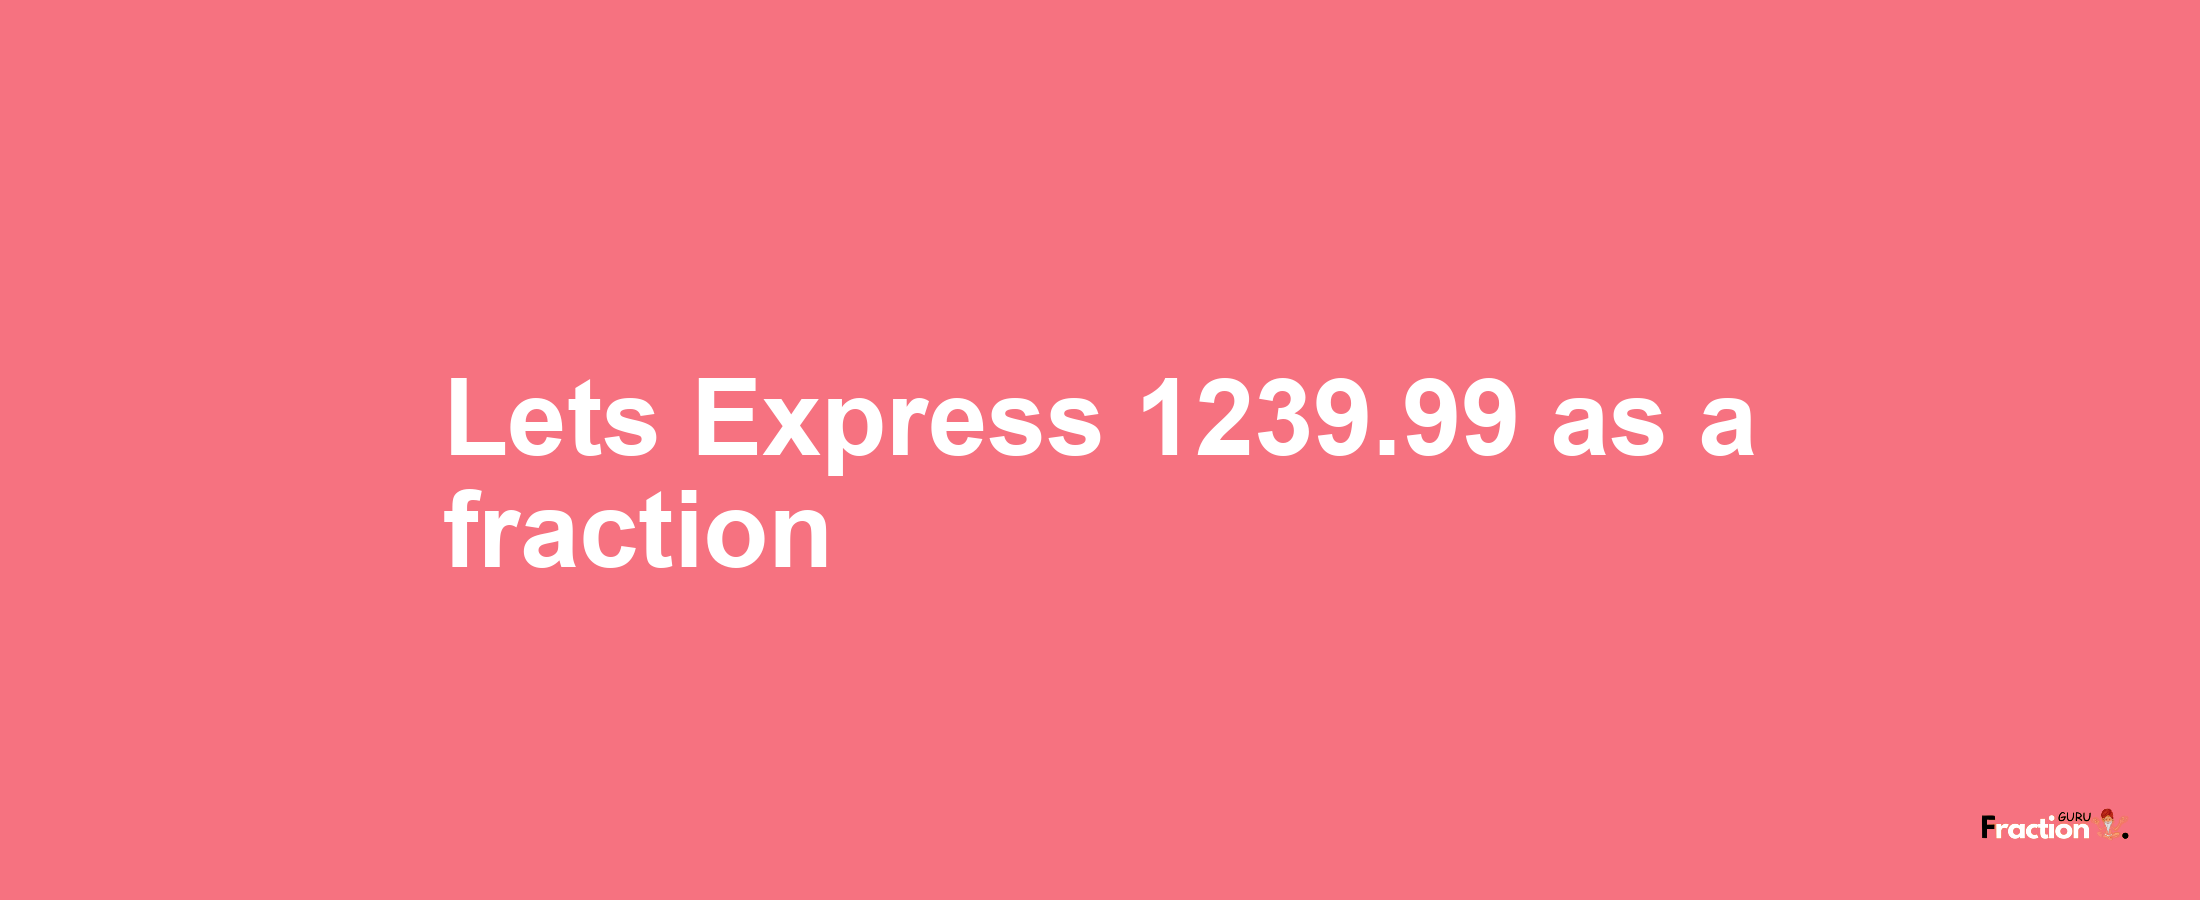 Lets Express 1239.99 as afraction